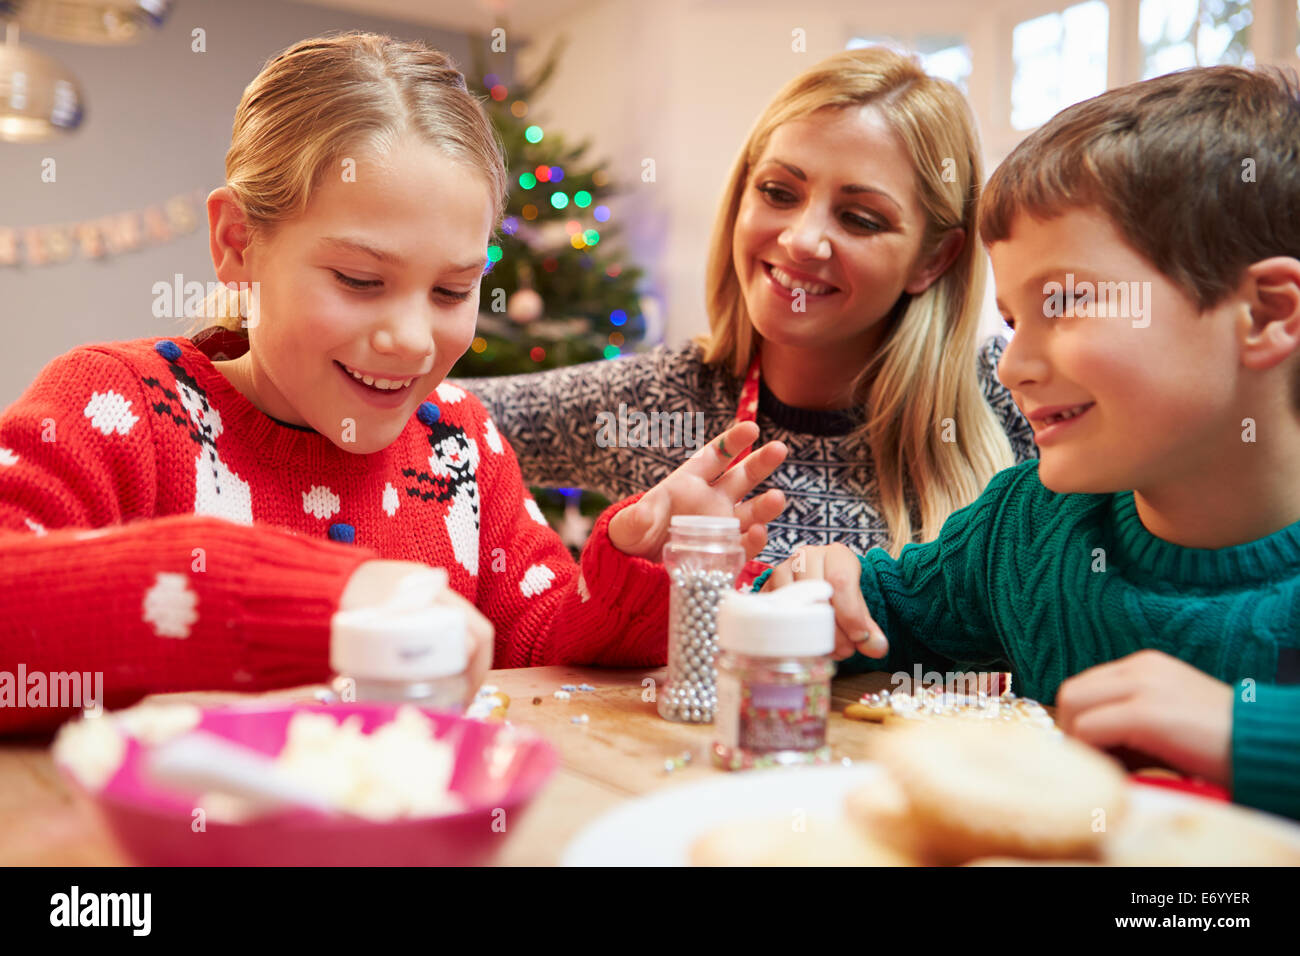 Mother And Children Decorating Christmas Cookies Together Stock Photo